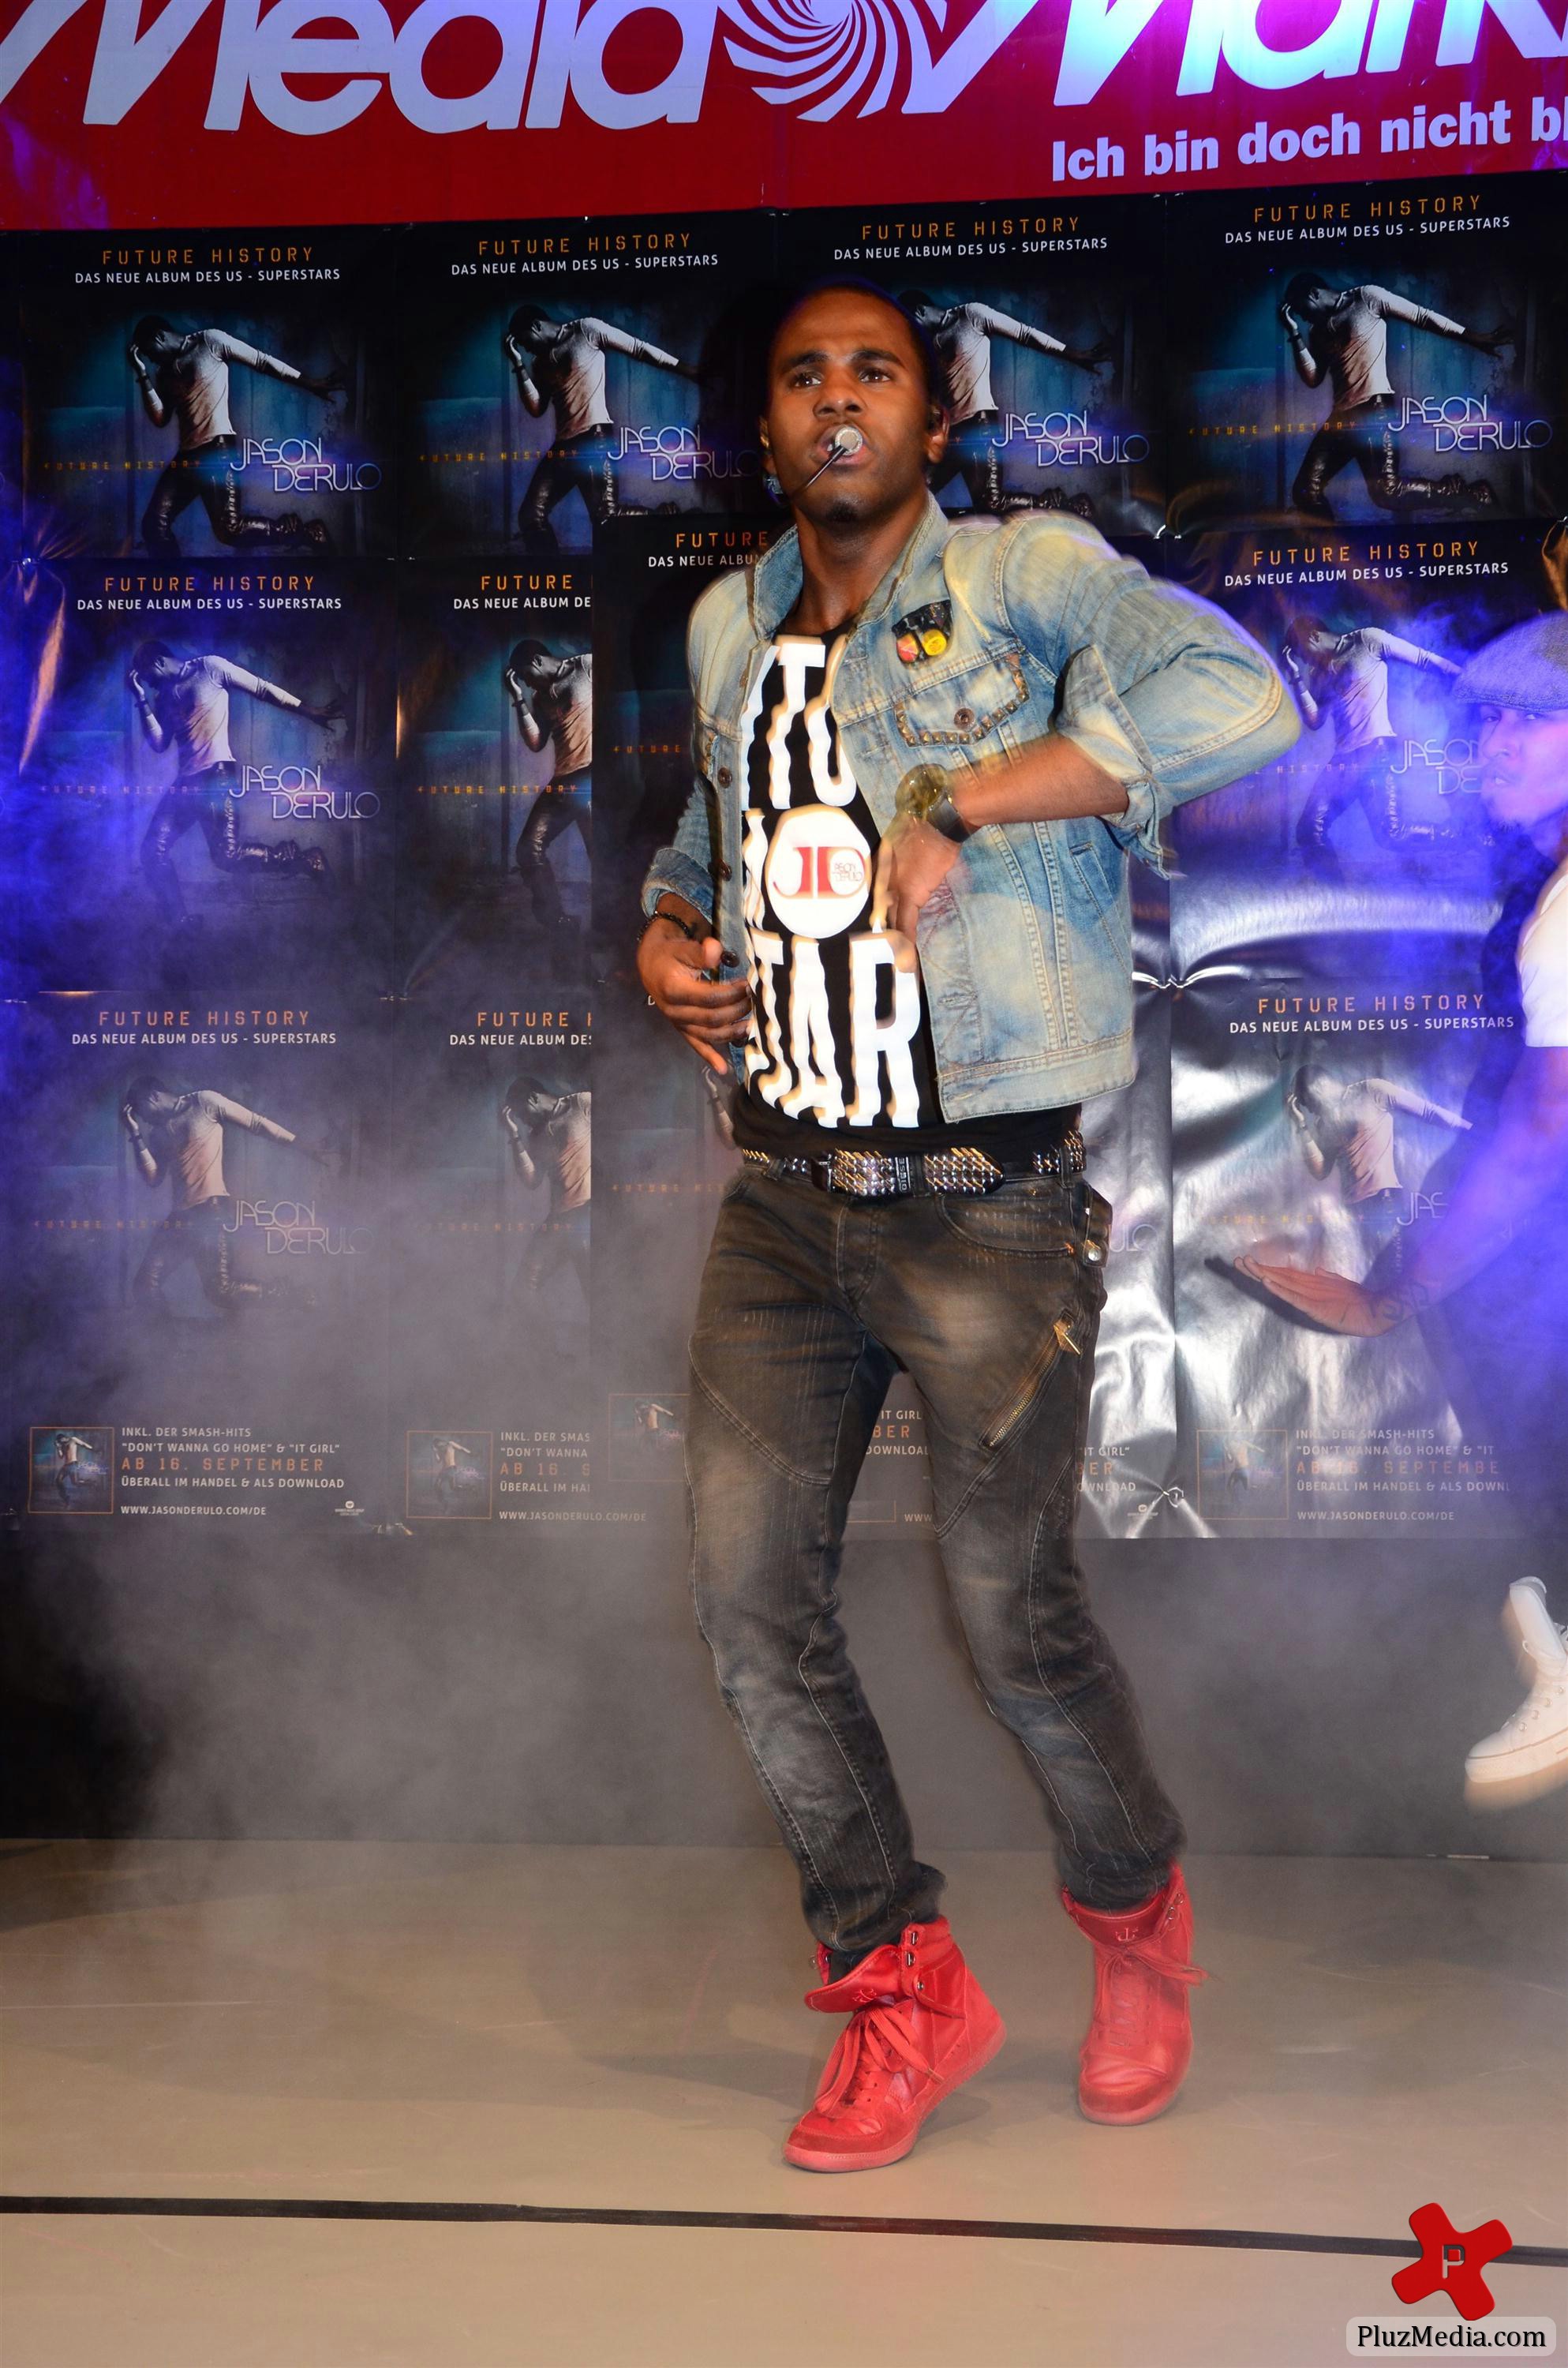 Jason Derulo performing live at Alexa mall photos | Picture 79691